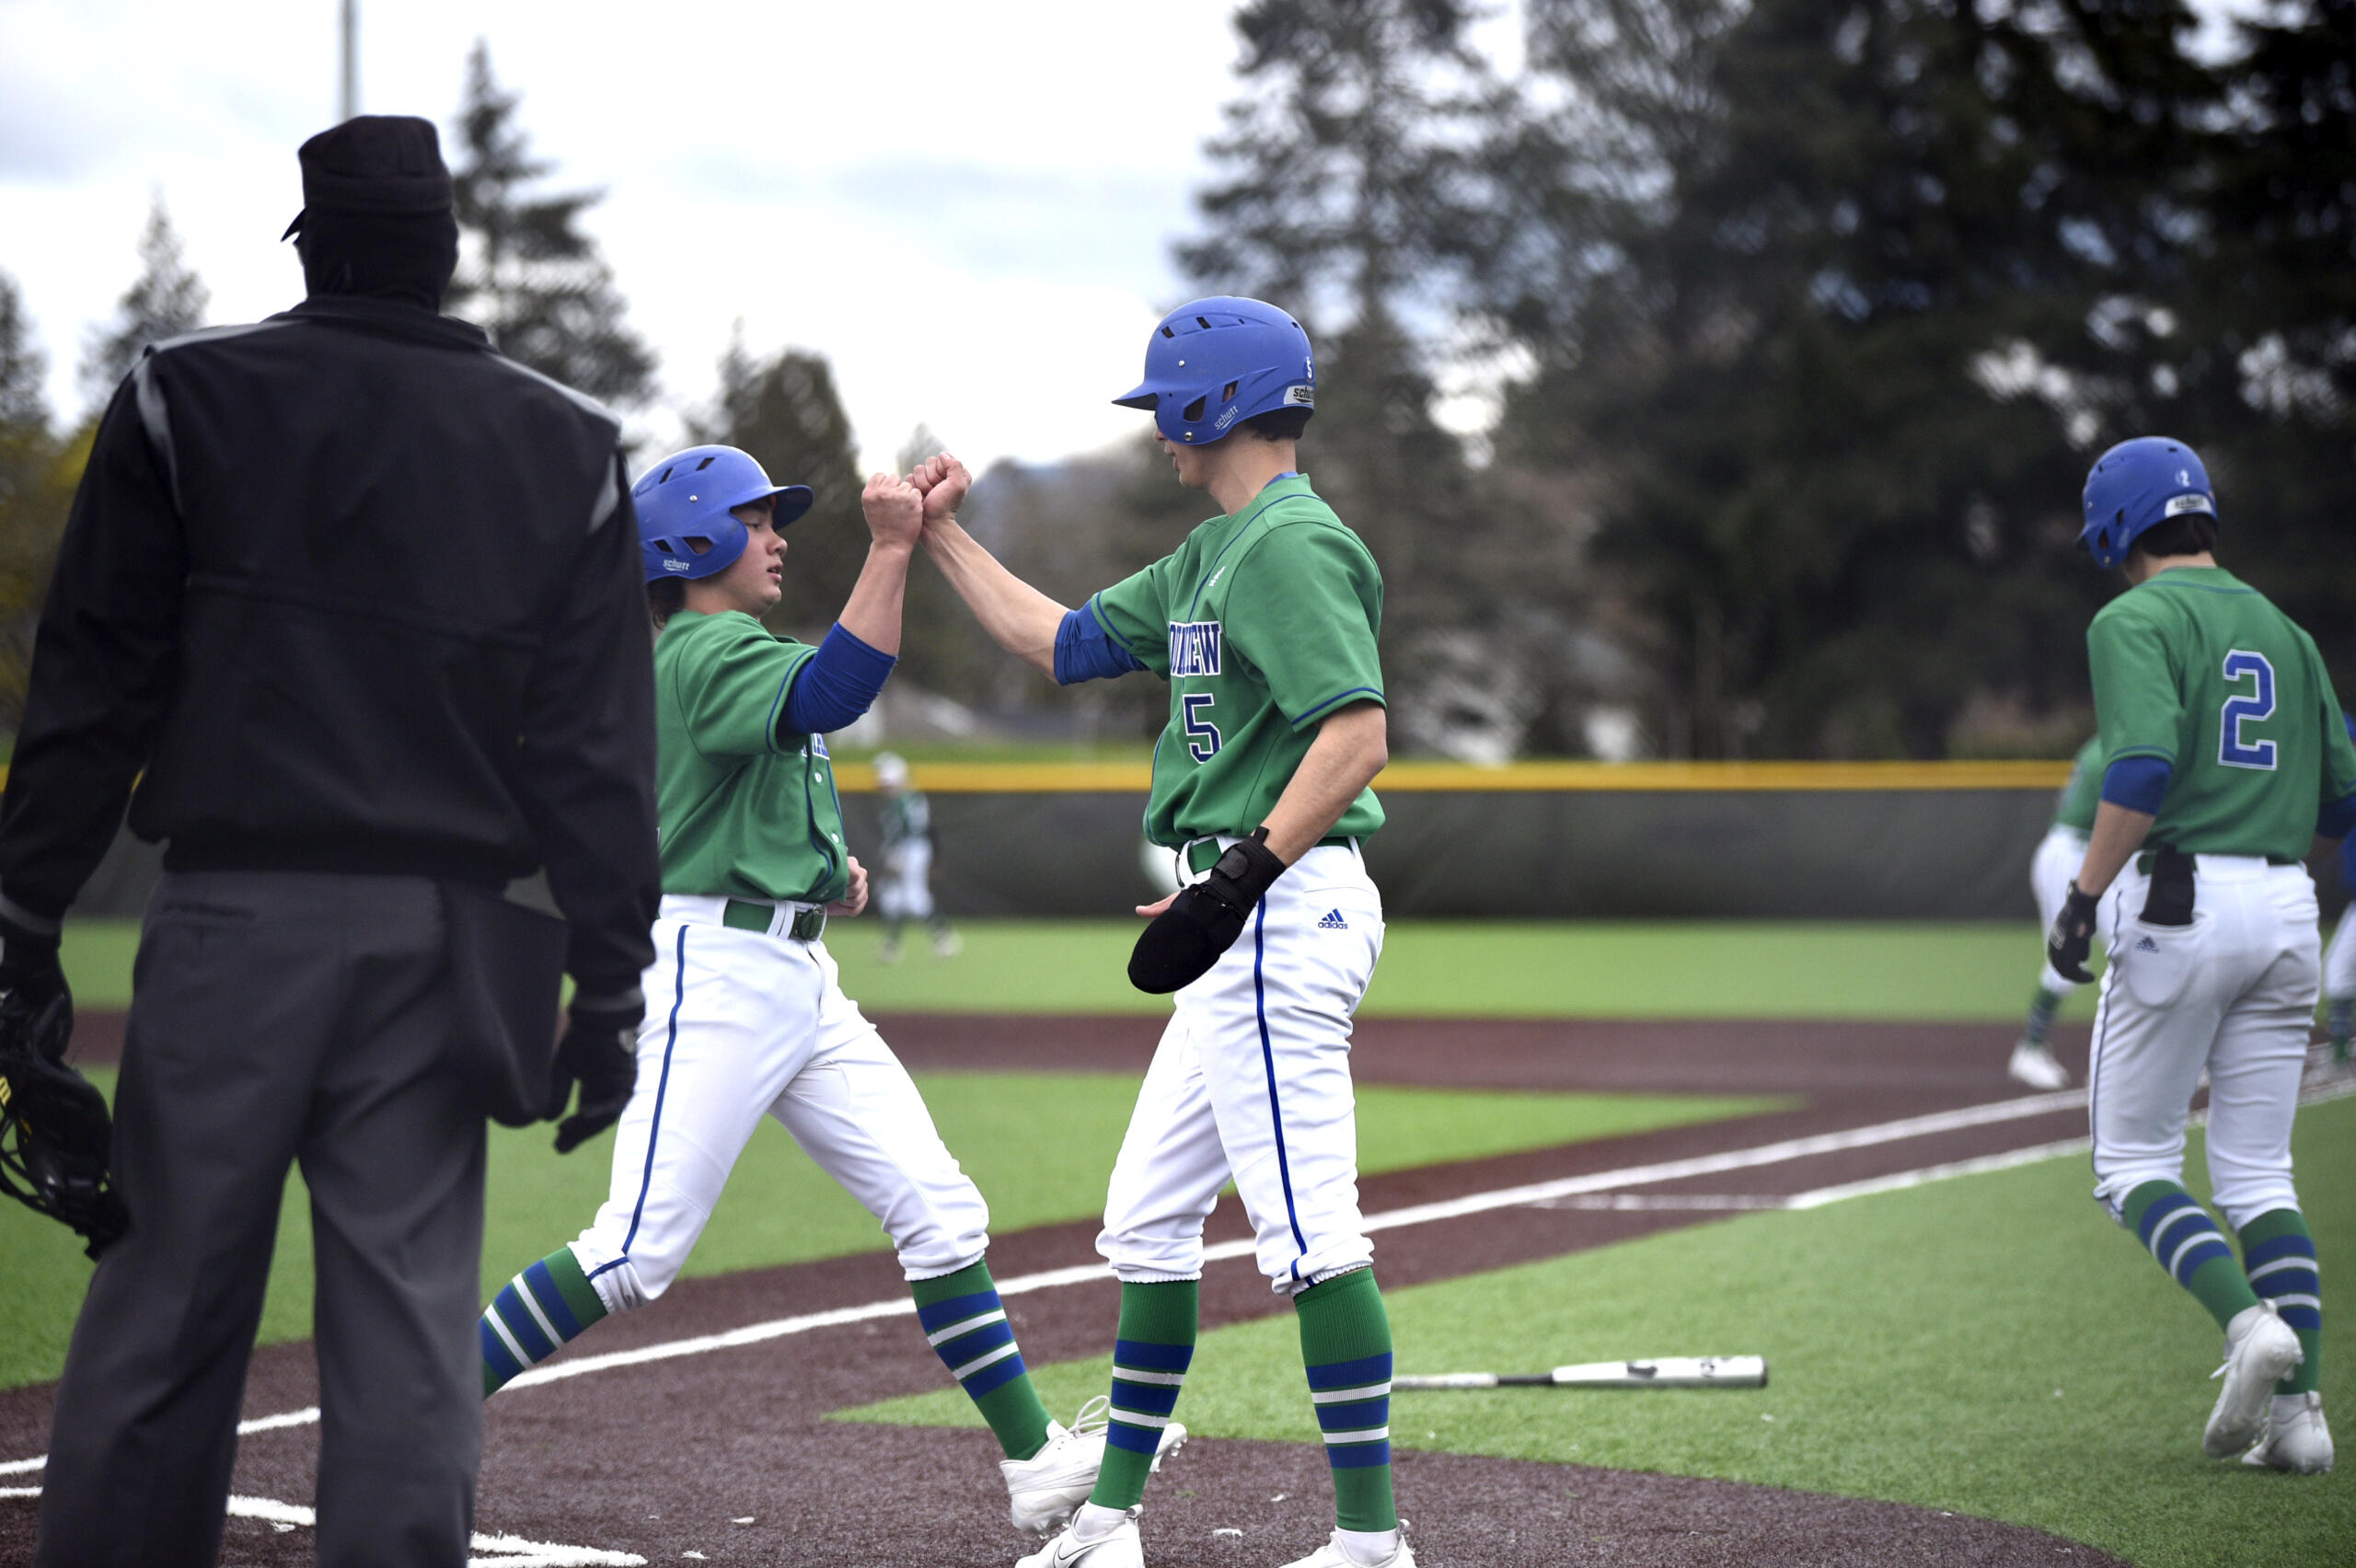 Mountain View’s Jett Hamilton and Jacob Martin embrace at home plate after each scored runs in the first inning of a 3A Greater St. Helens League baseball game against Evergreen on Tuesday, April 18, 2023, at Evergreen High School.